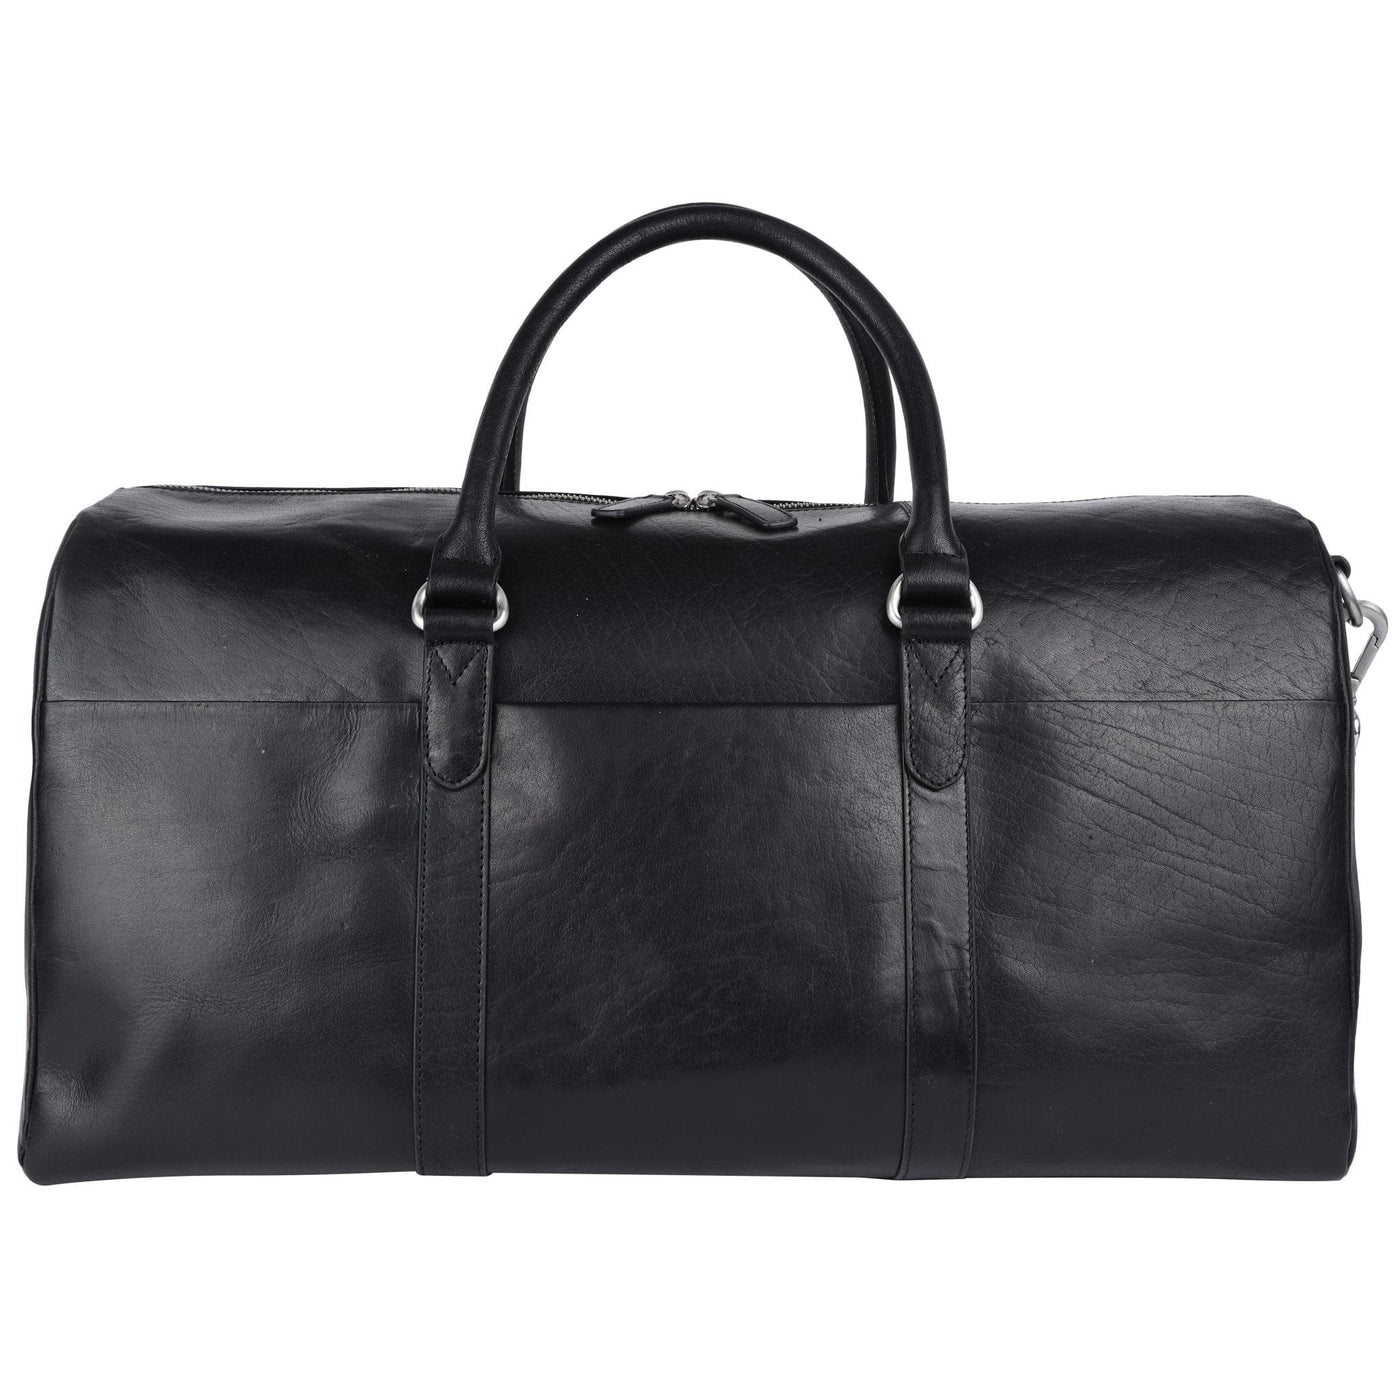 The Duffle GYM Weekend Travel Bag